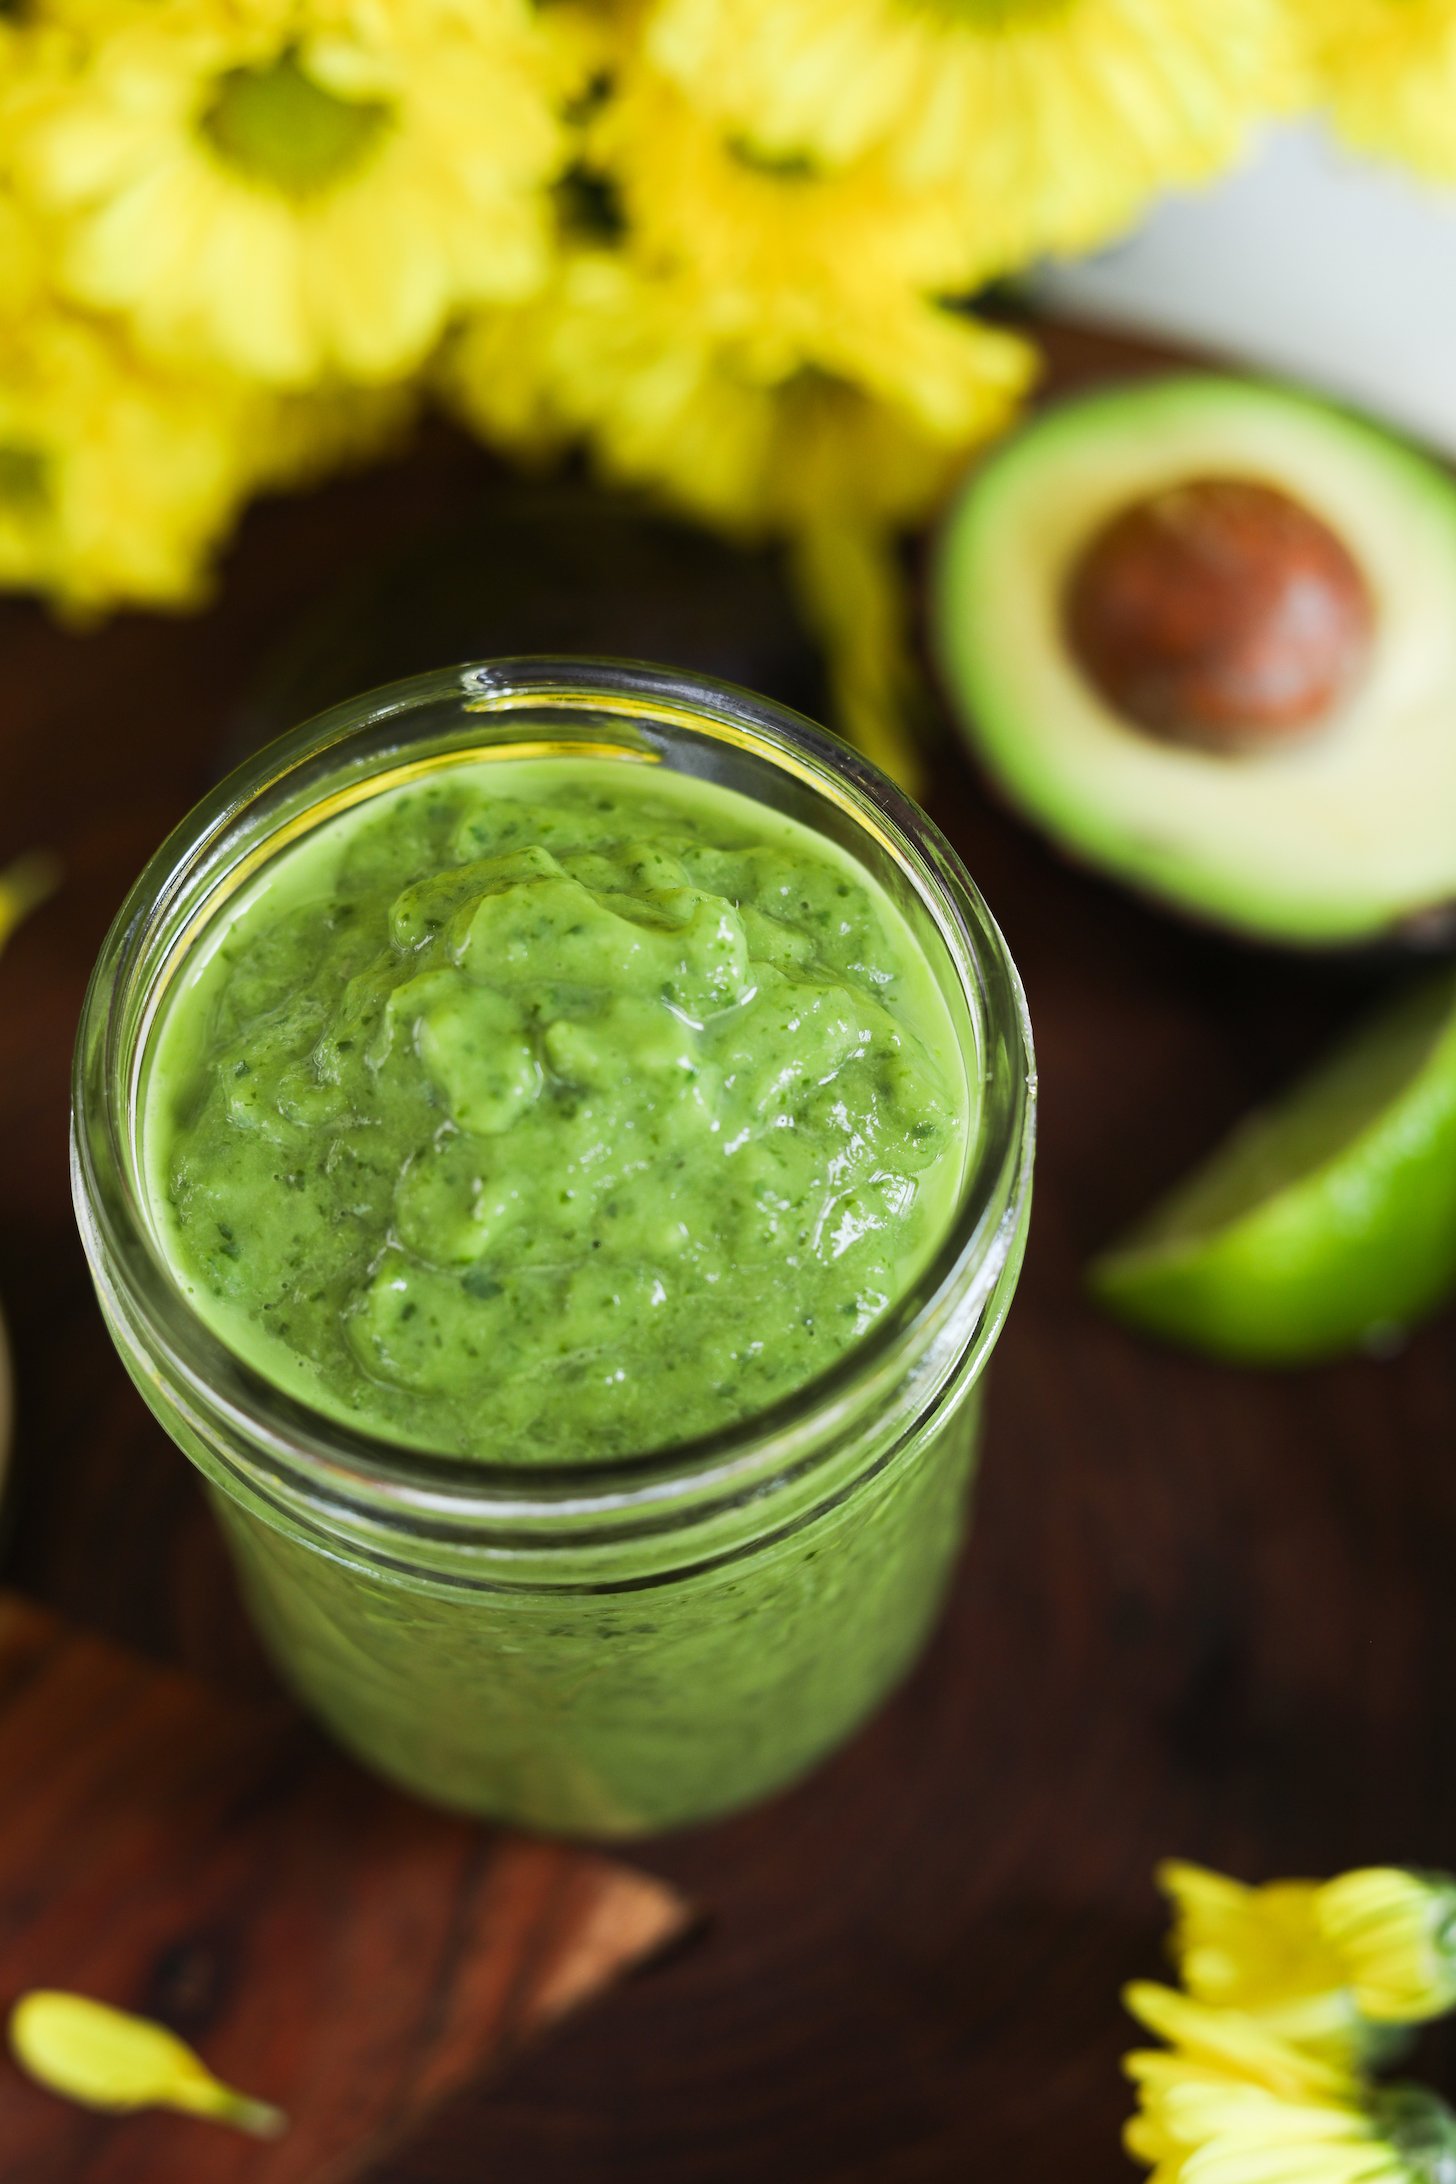 A jar of green creamy dressing with yellow flowers and avocado in the background.